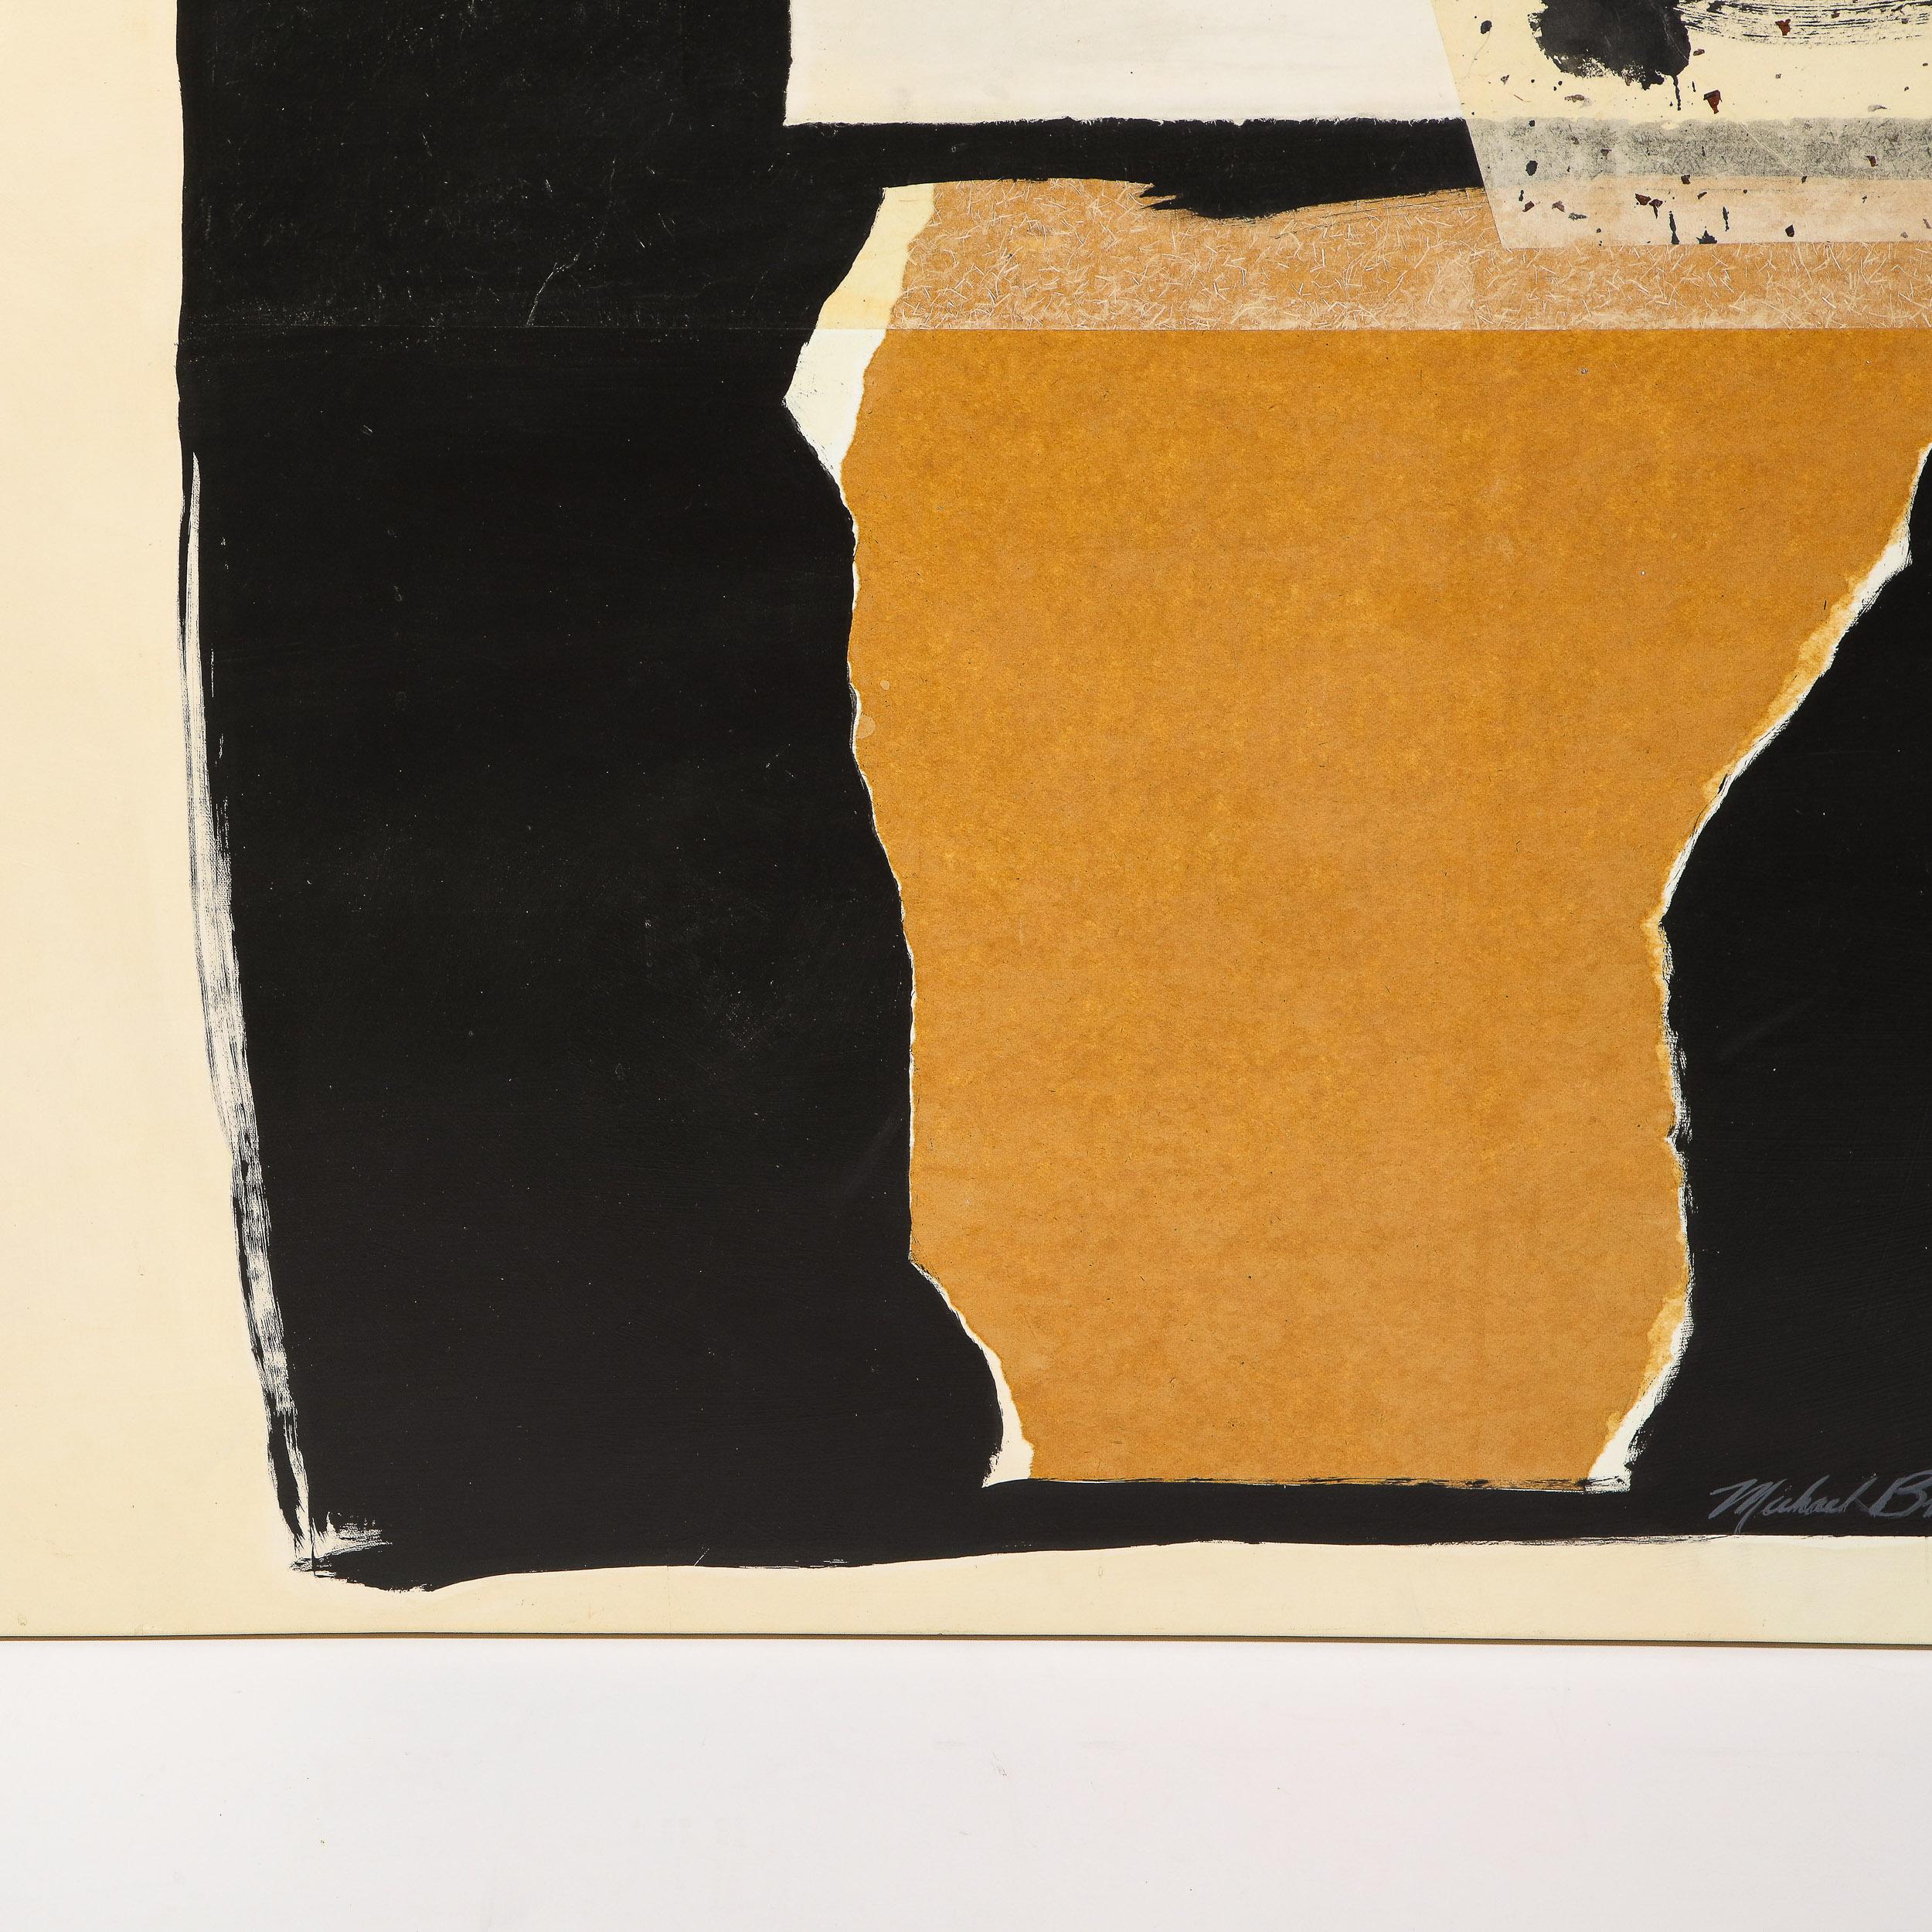 This refined mixed media work was realized by the esteemed American artist Michael Brangoccio in 1986. Realized in the manner of Robert Motherwell, this painting features laid paper and applied pigments against a natural canvas background. A black